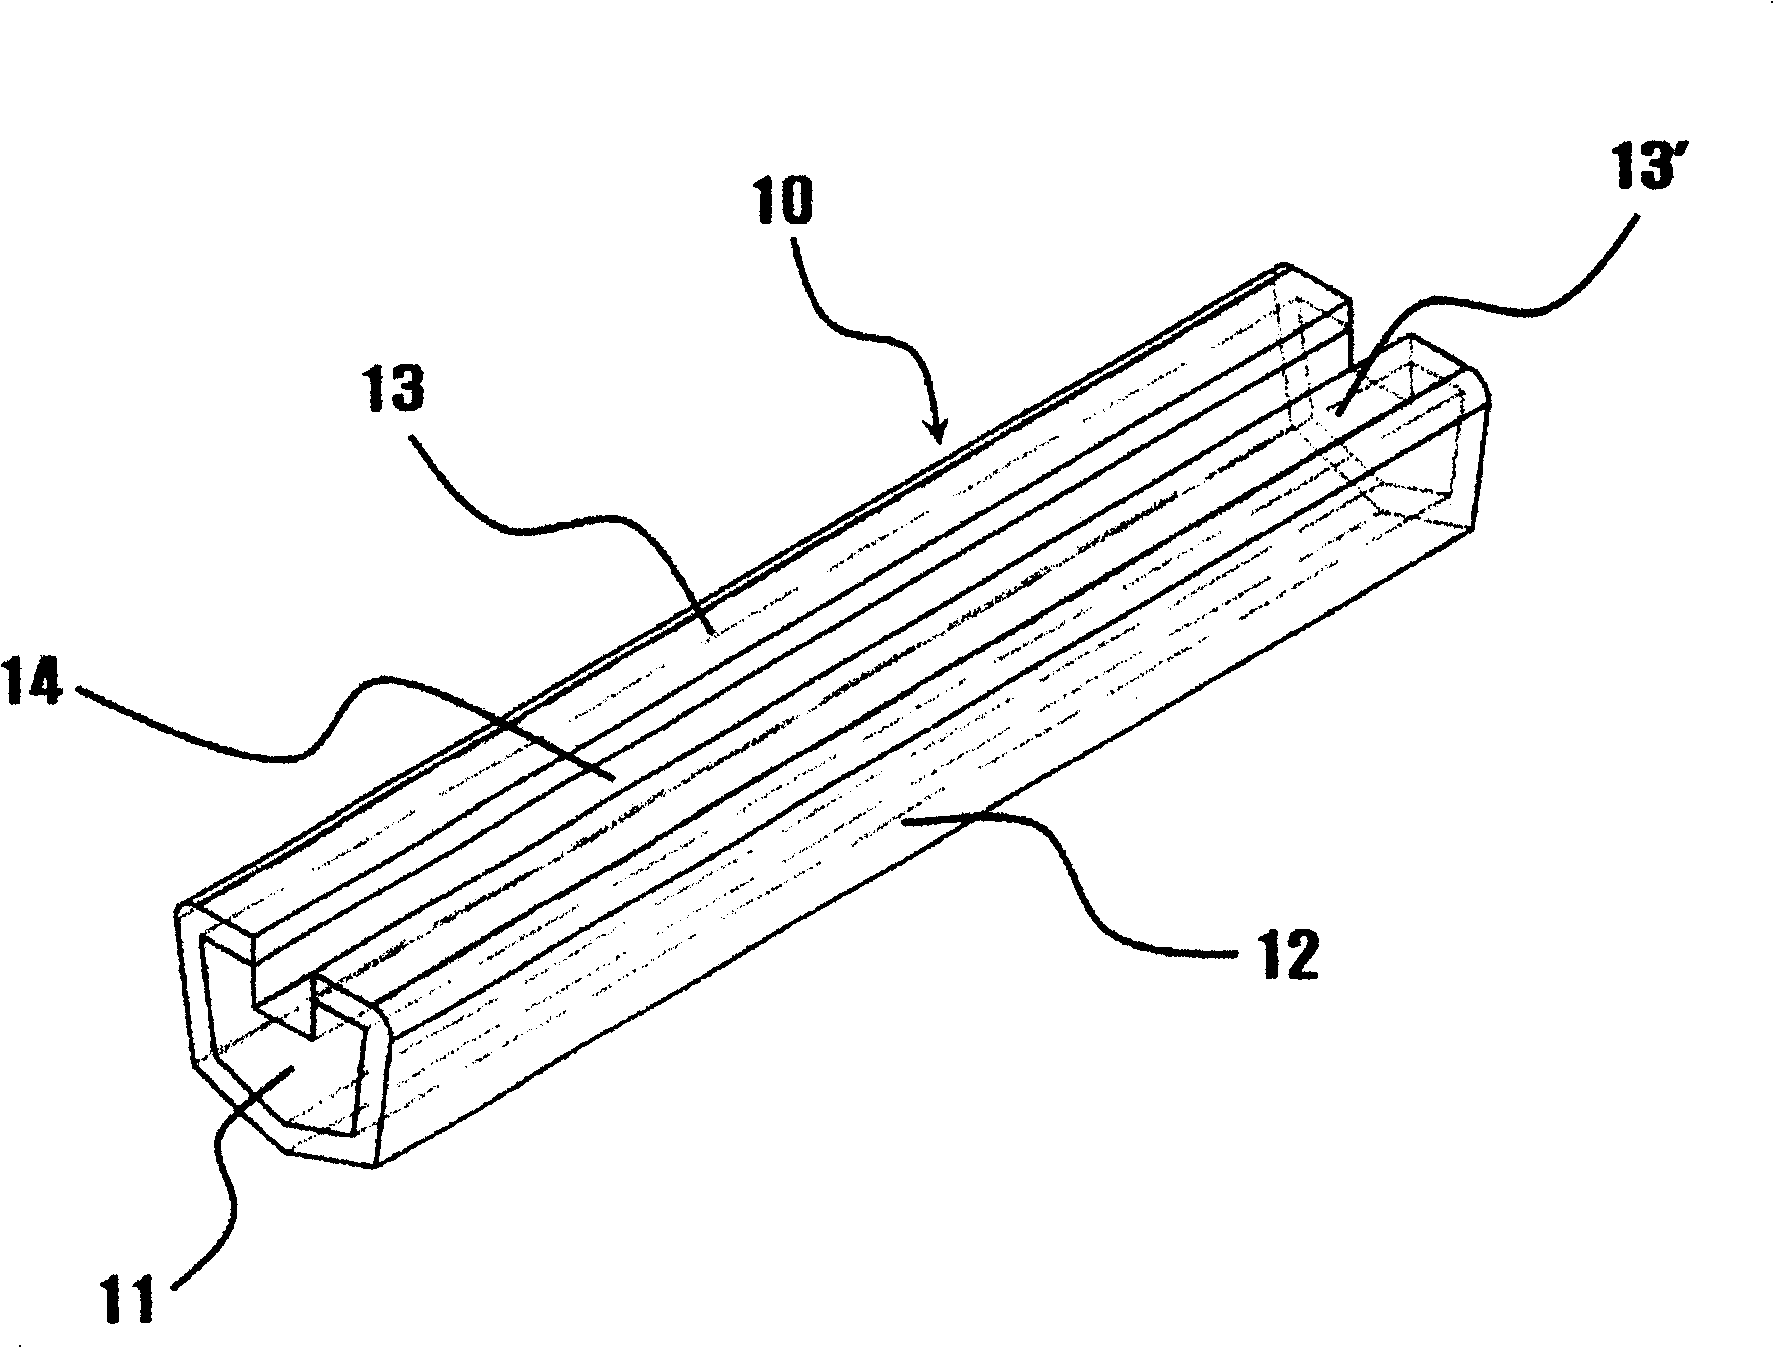 Getter composition and device for introducing of mercury into fluorescence lamp for BLU